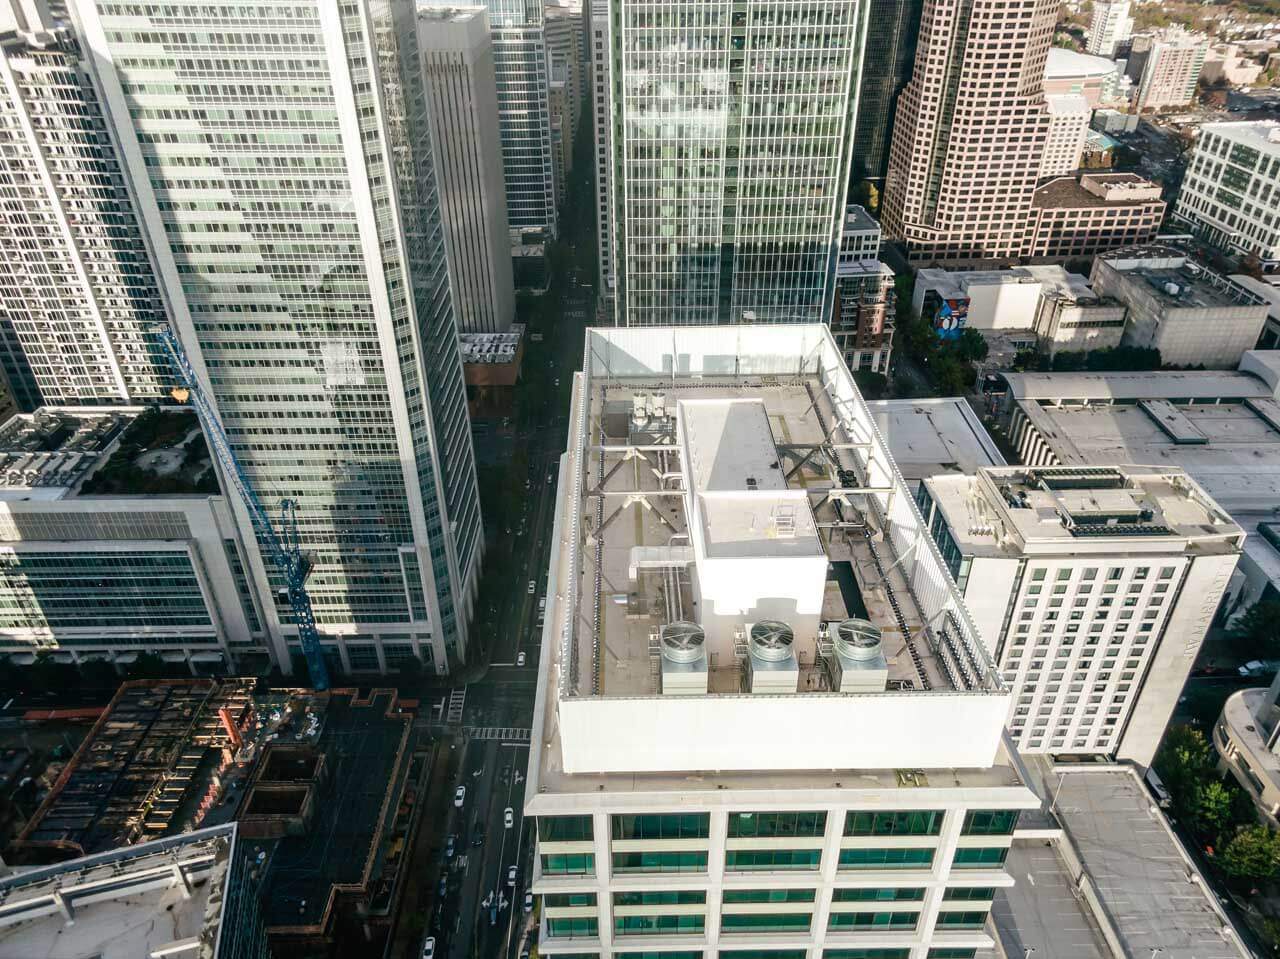 Aerial view of a building's roof in uptown Charlotte, NC.